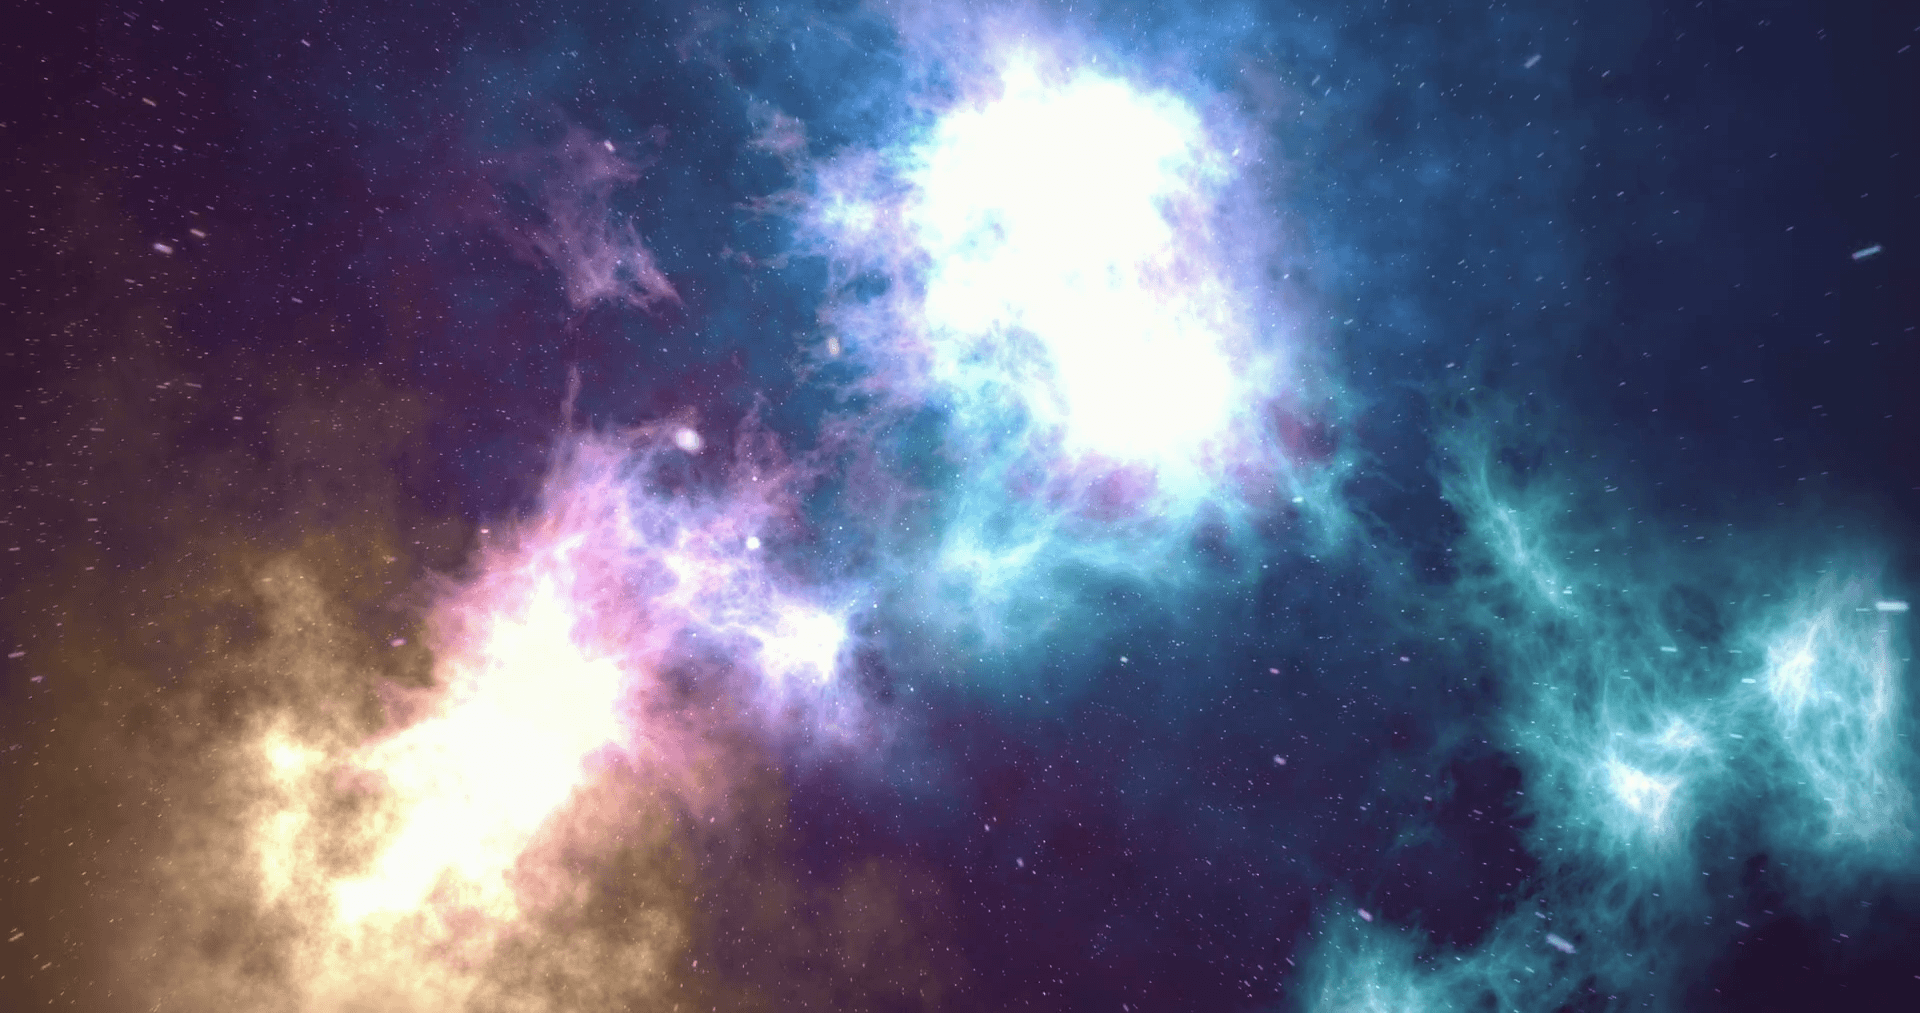 Starry outer space background with nebula. Colorful starry night sky